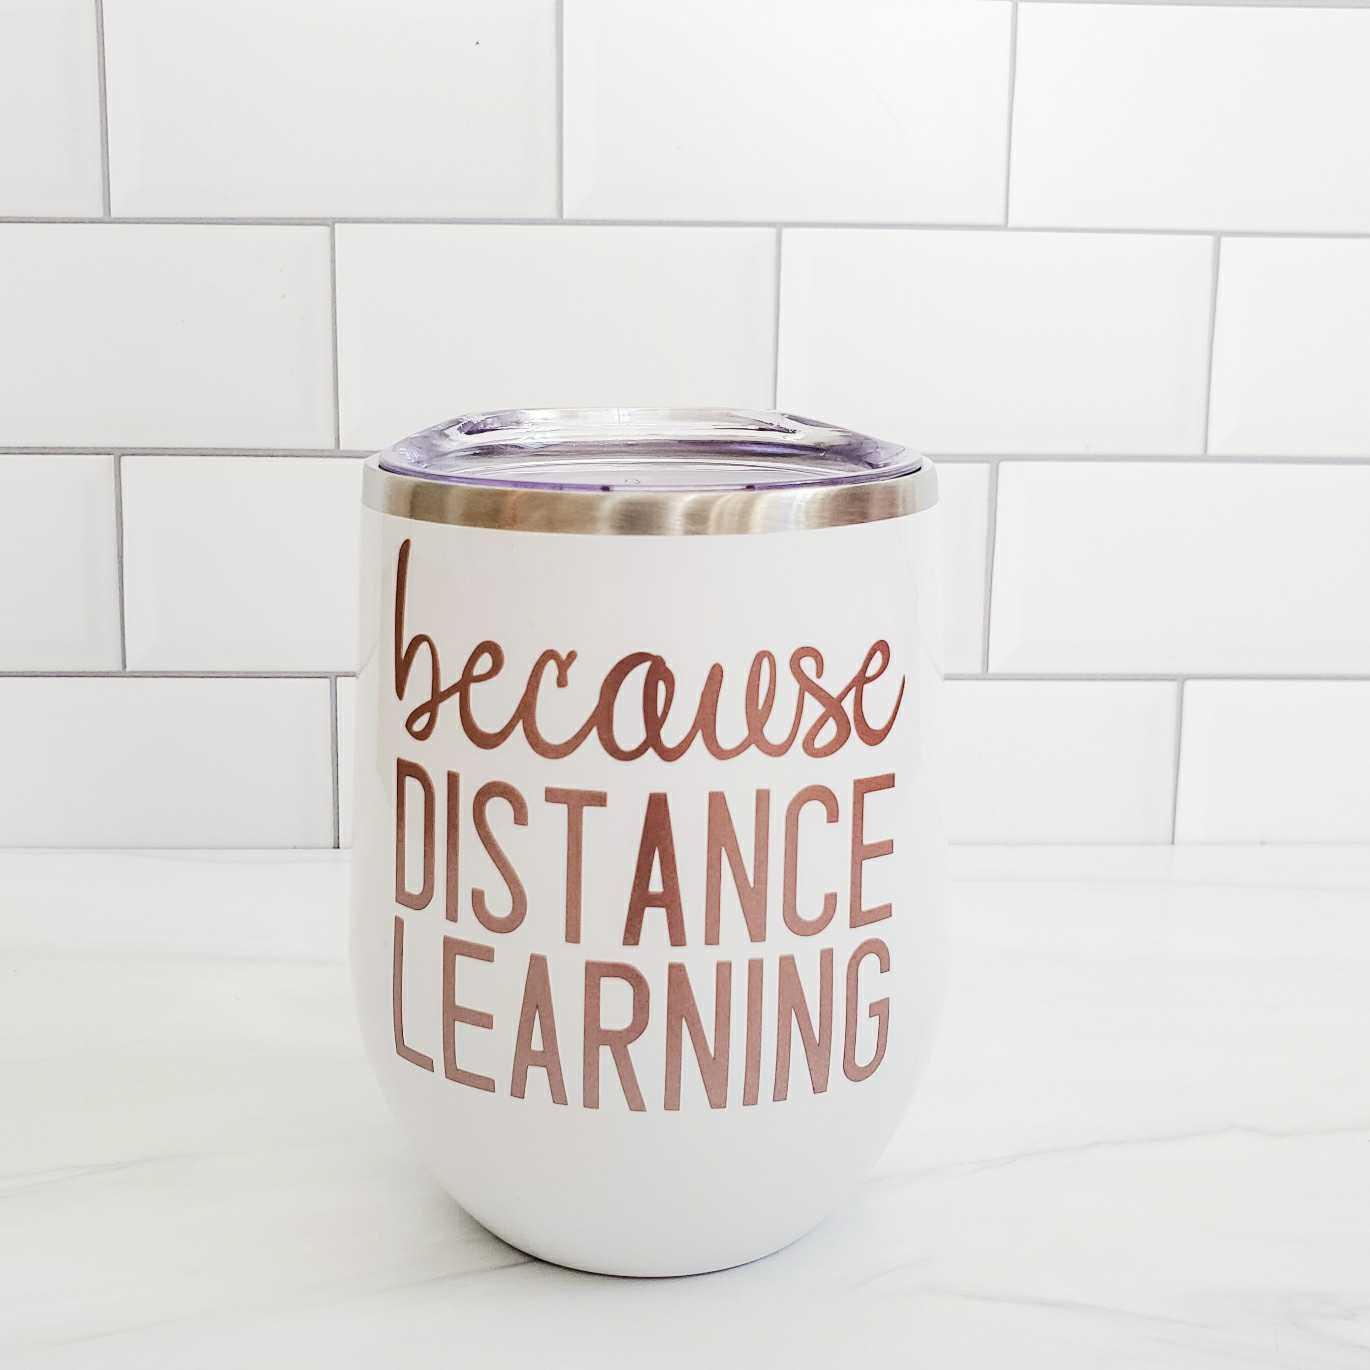 BECAUSE DISTANCE LEARNING Insulated Wine Tumbler Salt and Sparkle